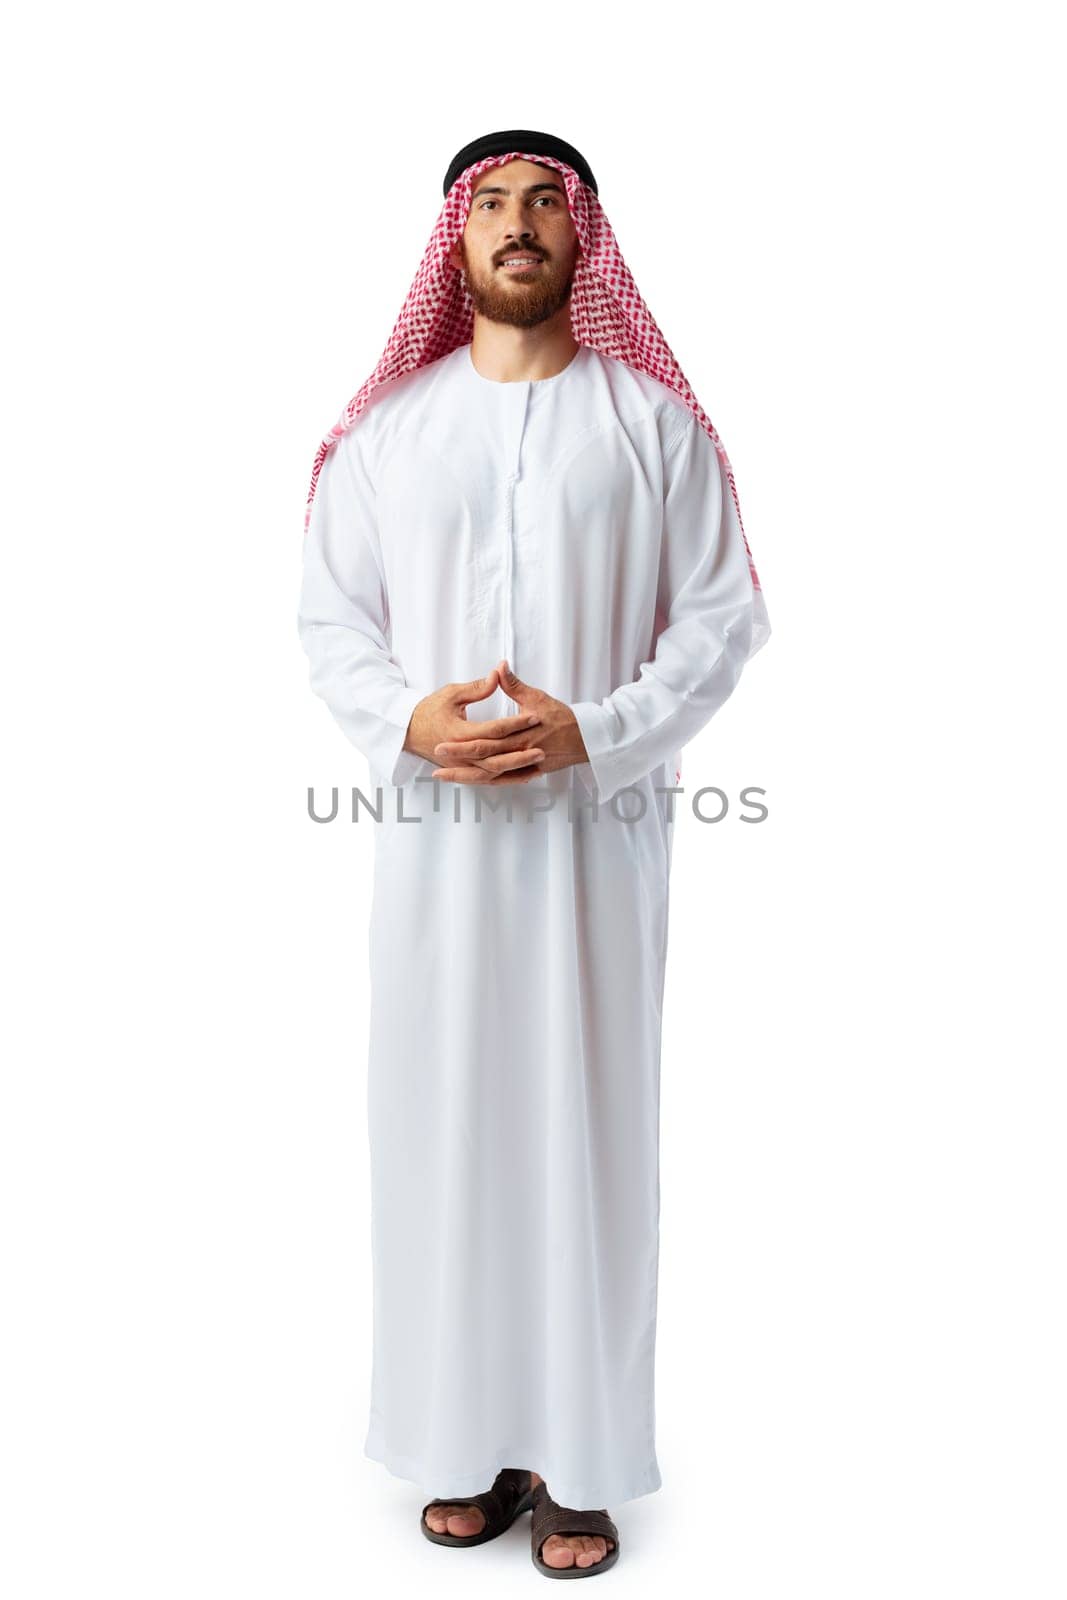 Smiling arab man while standing in an isolated white studio